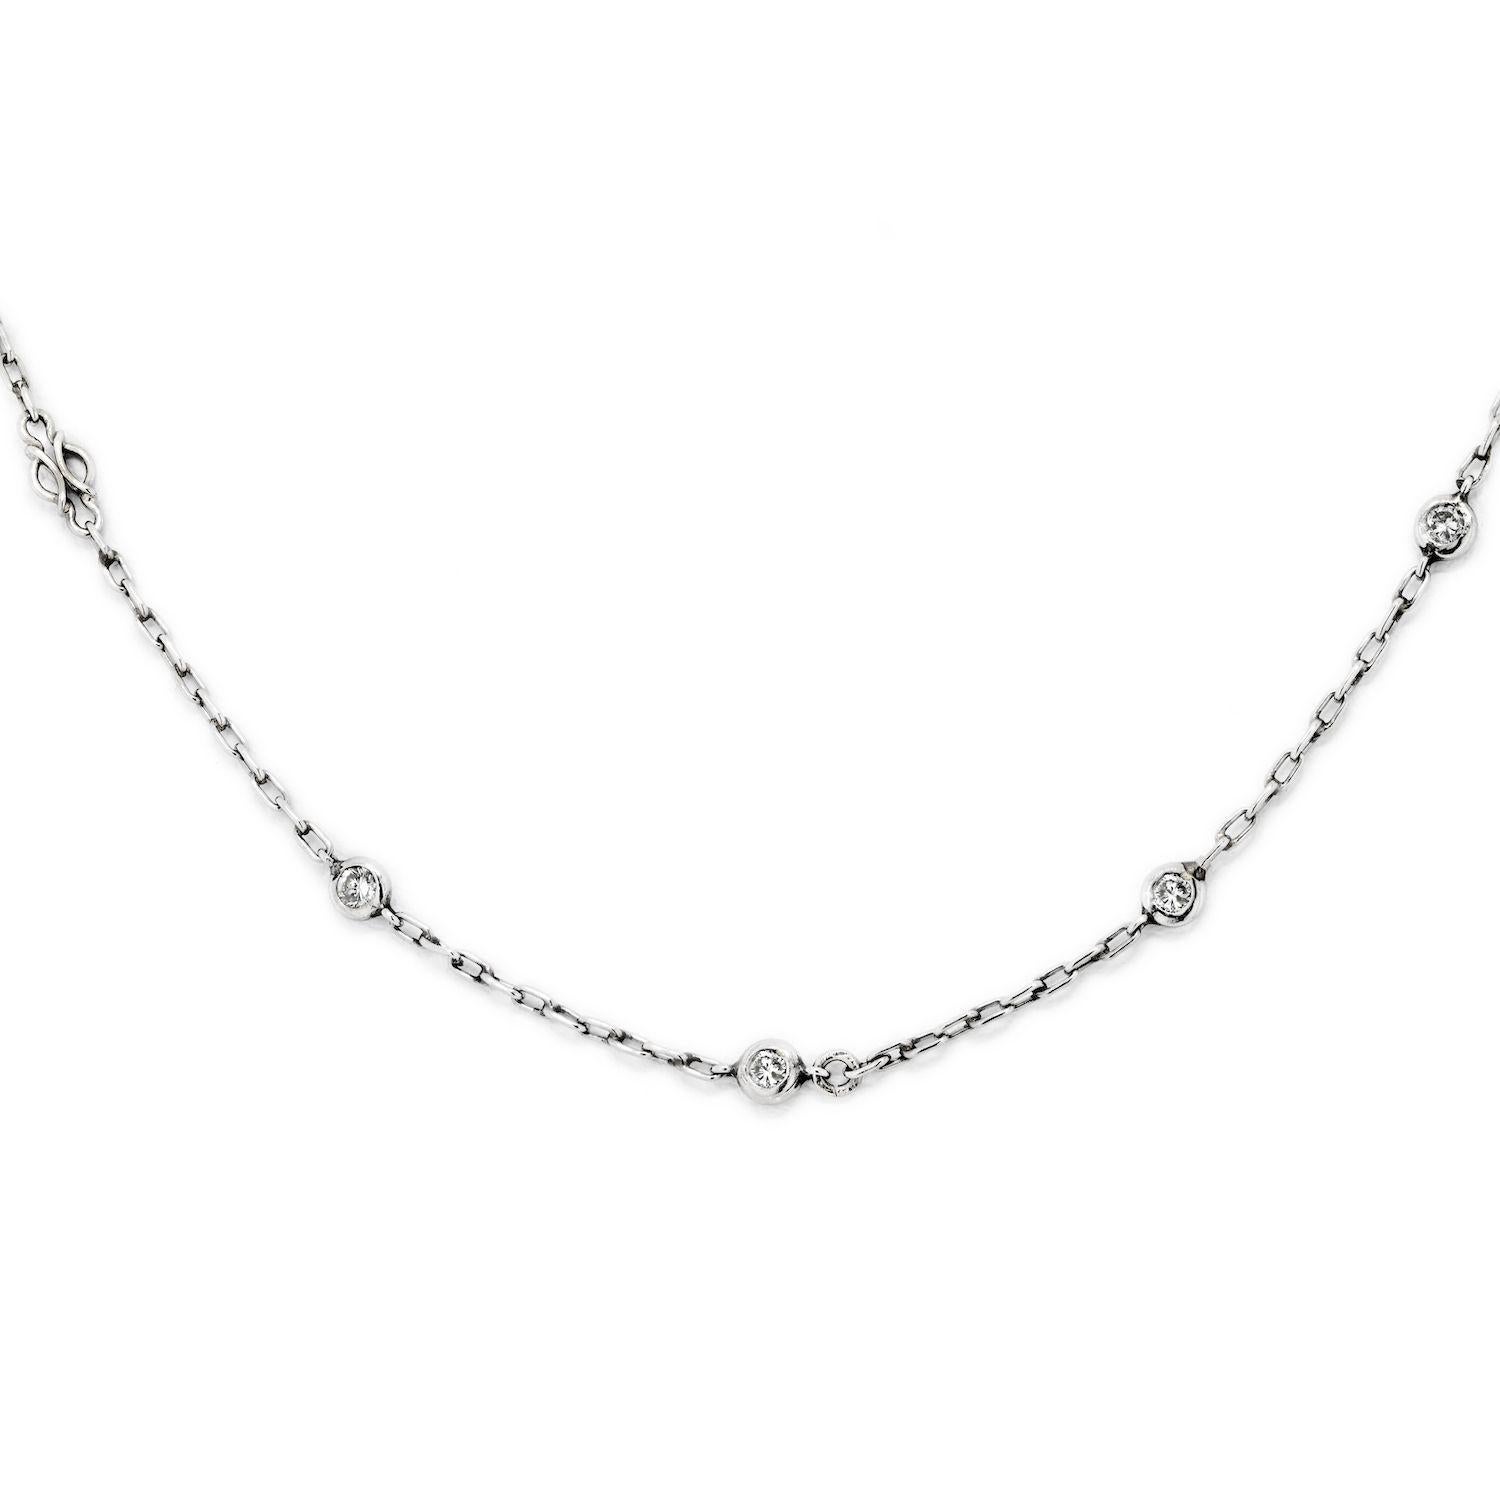 The vintage platinum chain necklace that features 10 round diamonds of total carat weight 0.50cttw is a delicate piece of jewelry. The chain is crafted from high-quality platinum, which is known for its durability and luster, and is designed to sit